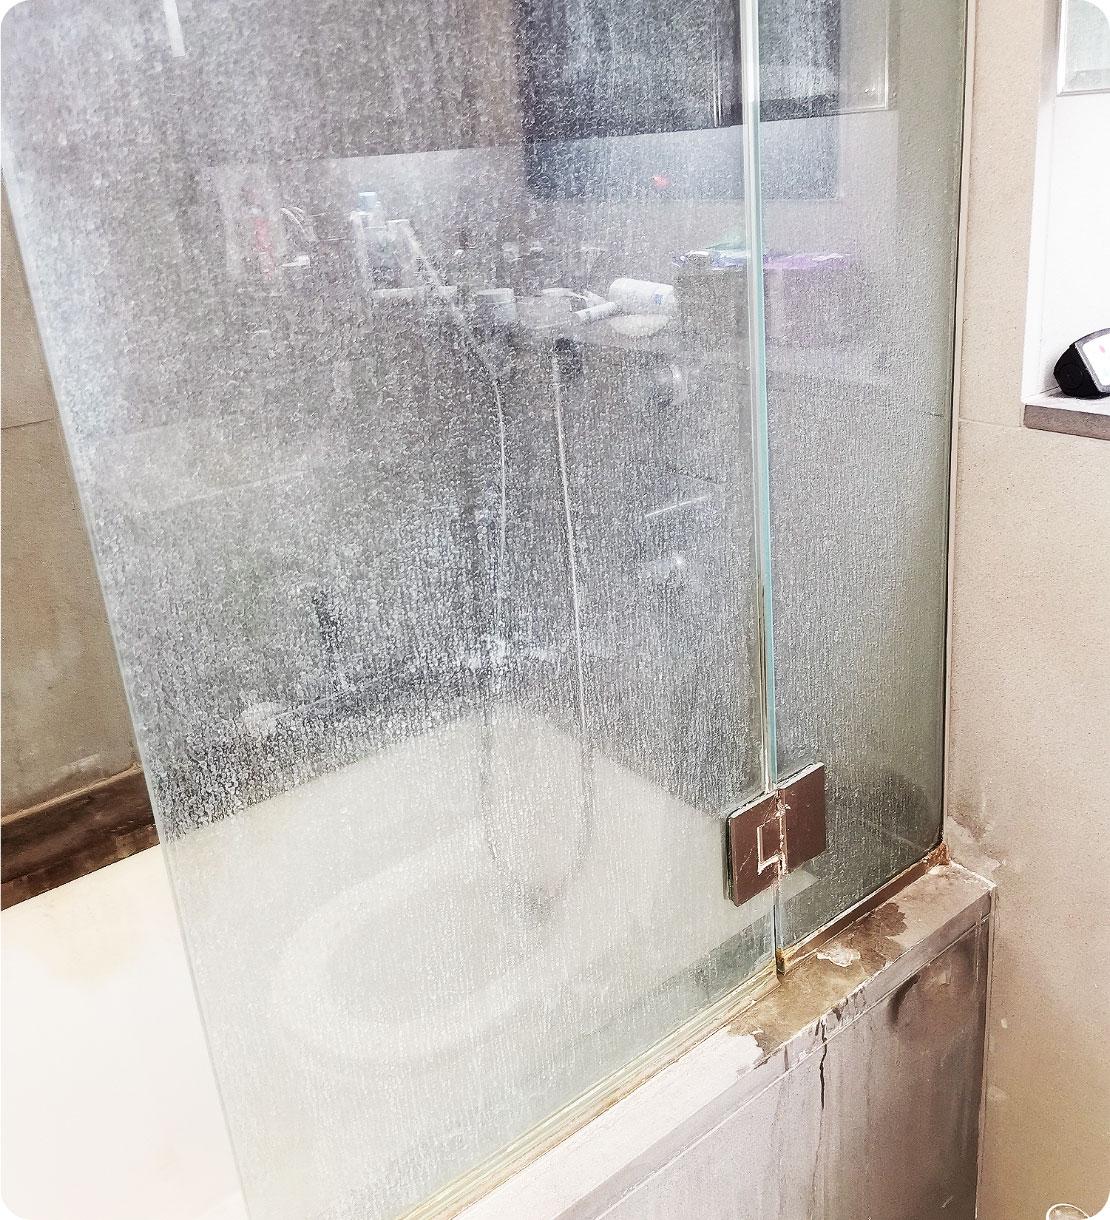 The image shows a bathtub shower cabin that appears quite messy and dirty. The glass door is all smudgy and grainy, covered in soapy scum and limescale.